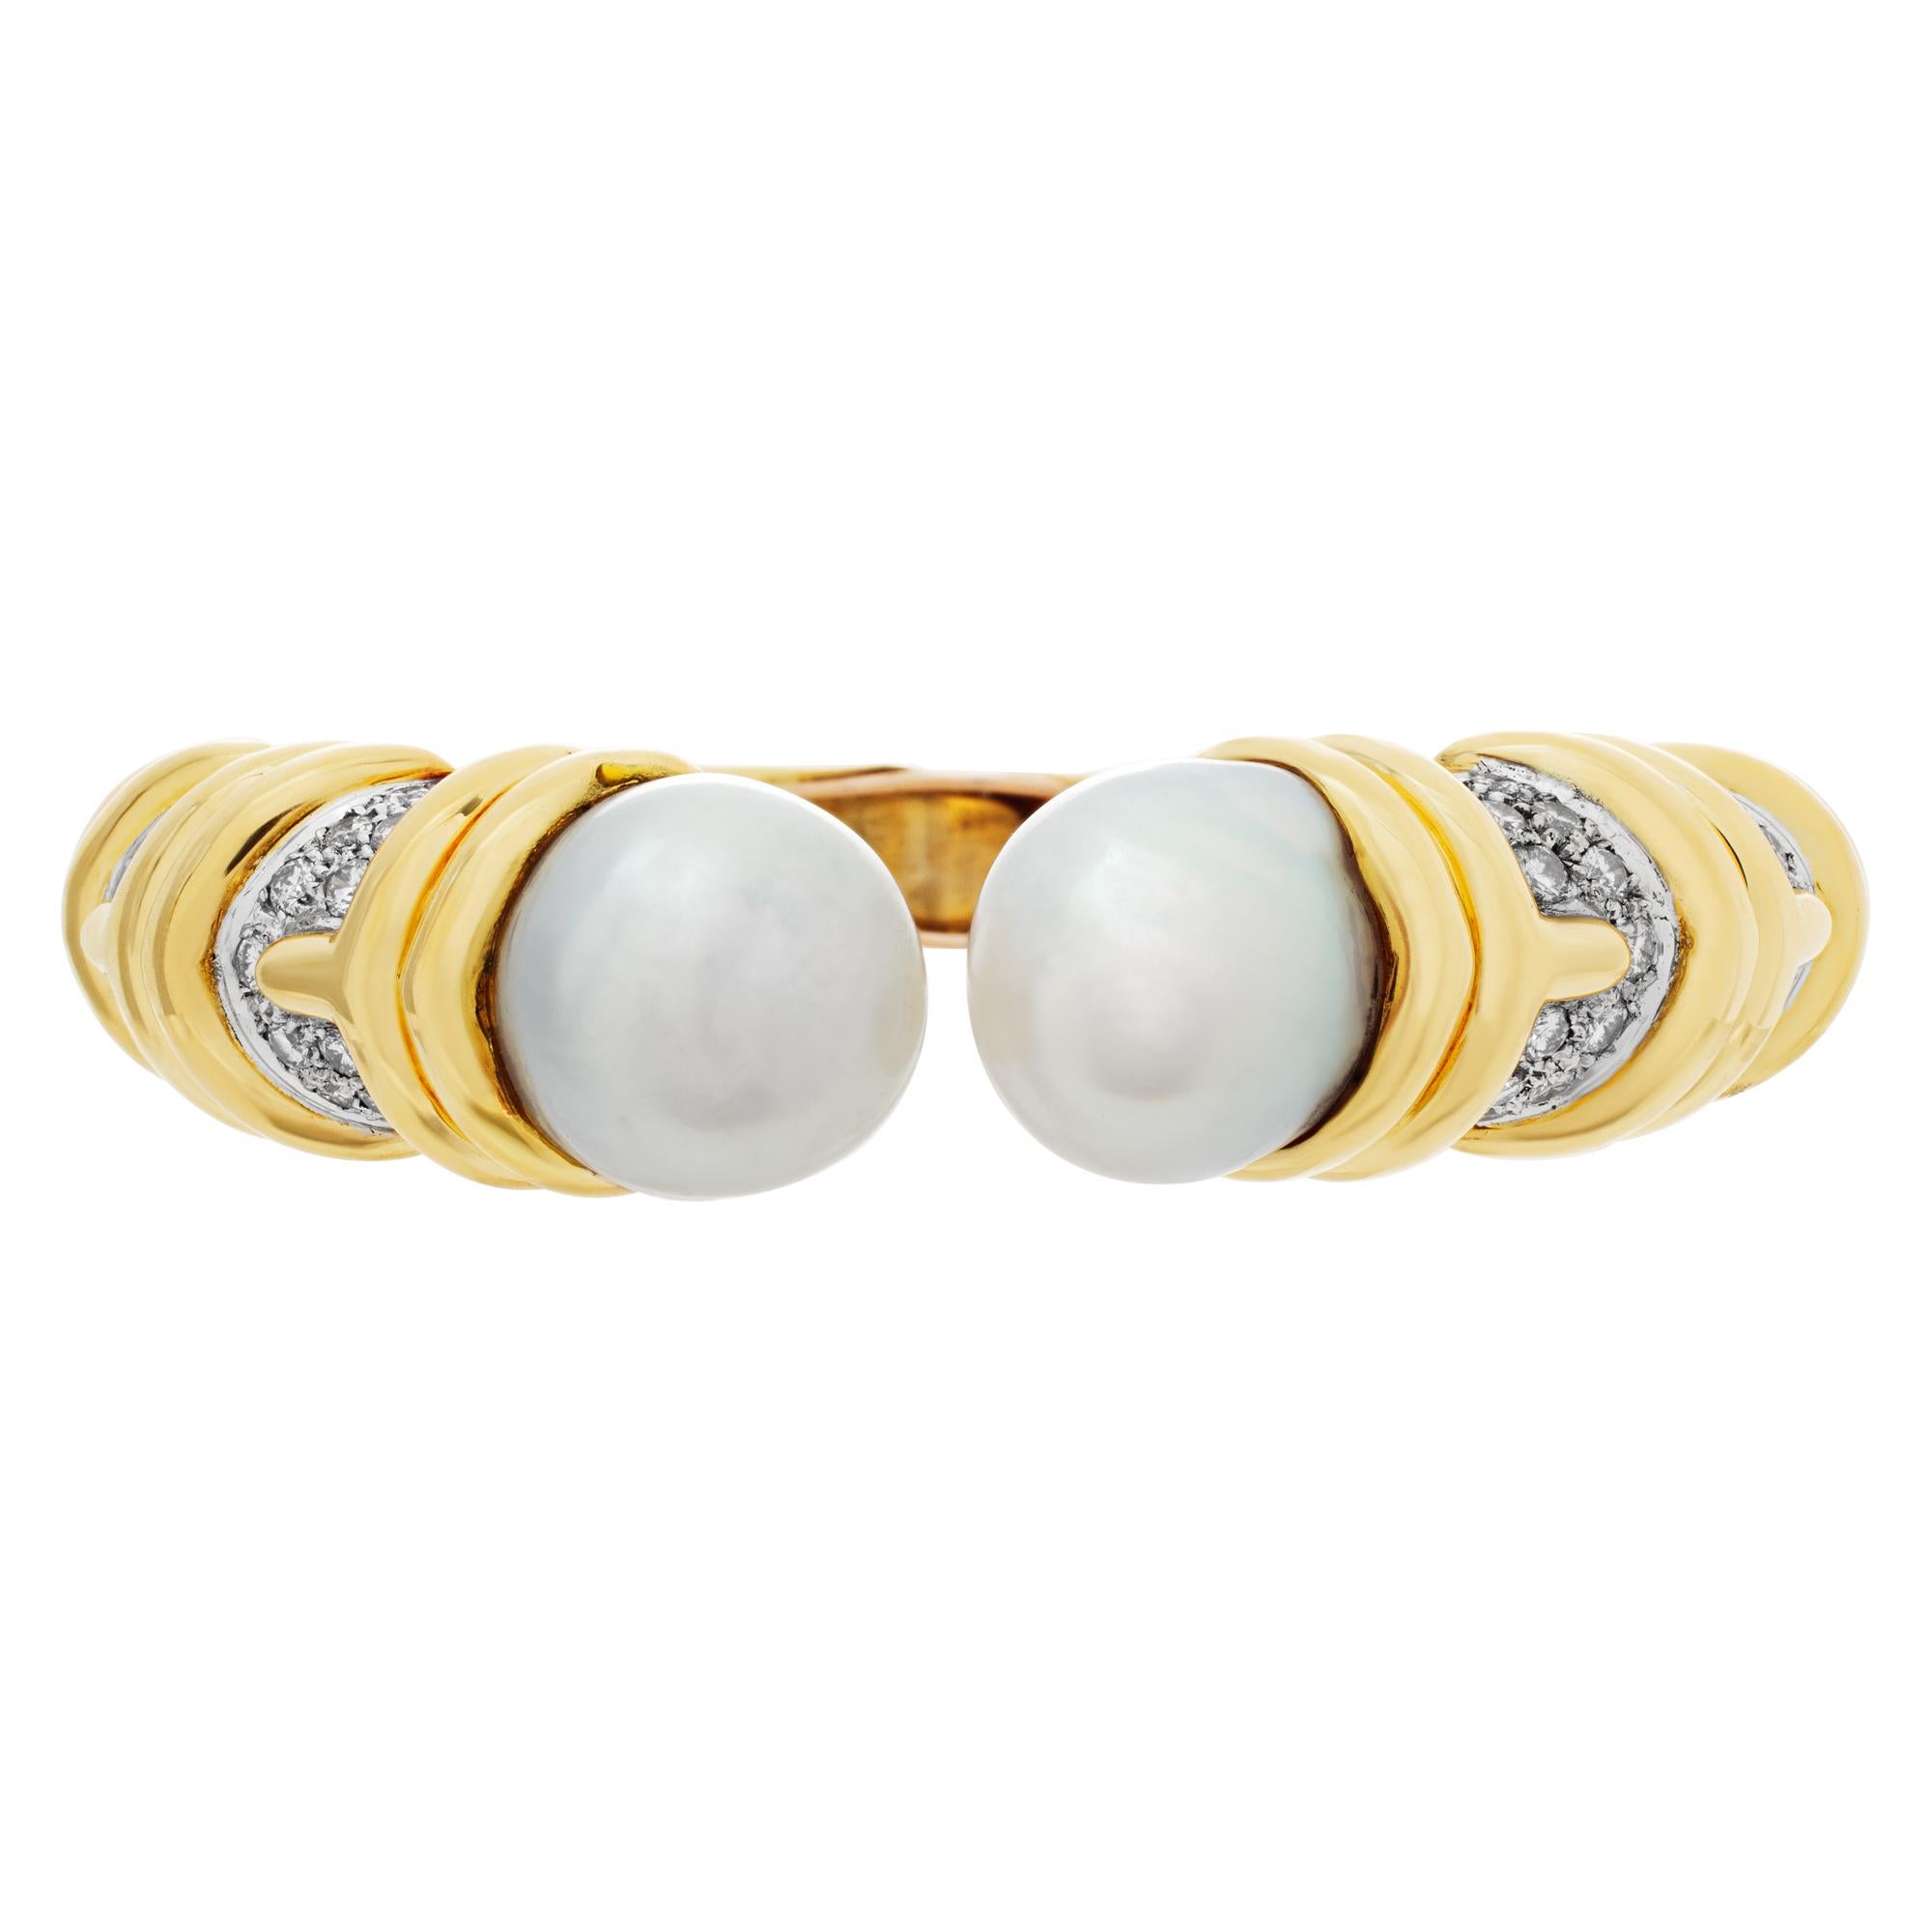 Pearl & diamonds hinged bangle, set in 18K yellow & white gold. Pearls with silver beautiful overtone are 15 x 15.5 mm. Round briliant cut diamonds total approx. weight: over 2.50 carats, estimate G-H color, VS clarity. Fits 6-7.5 inches wrist